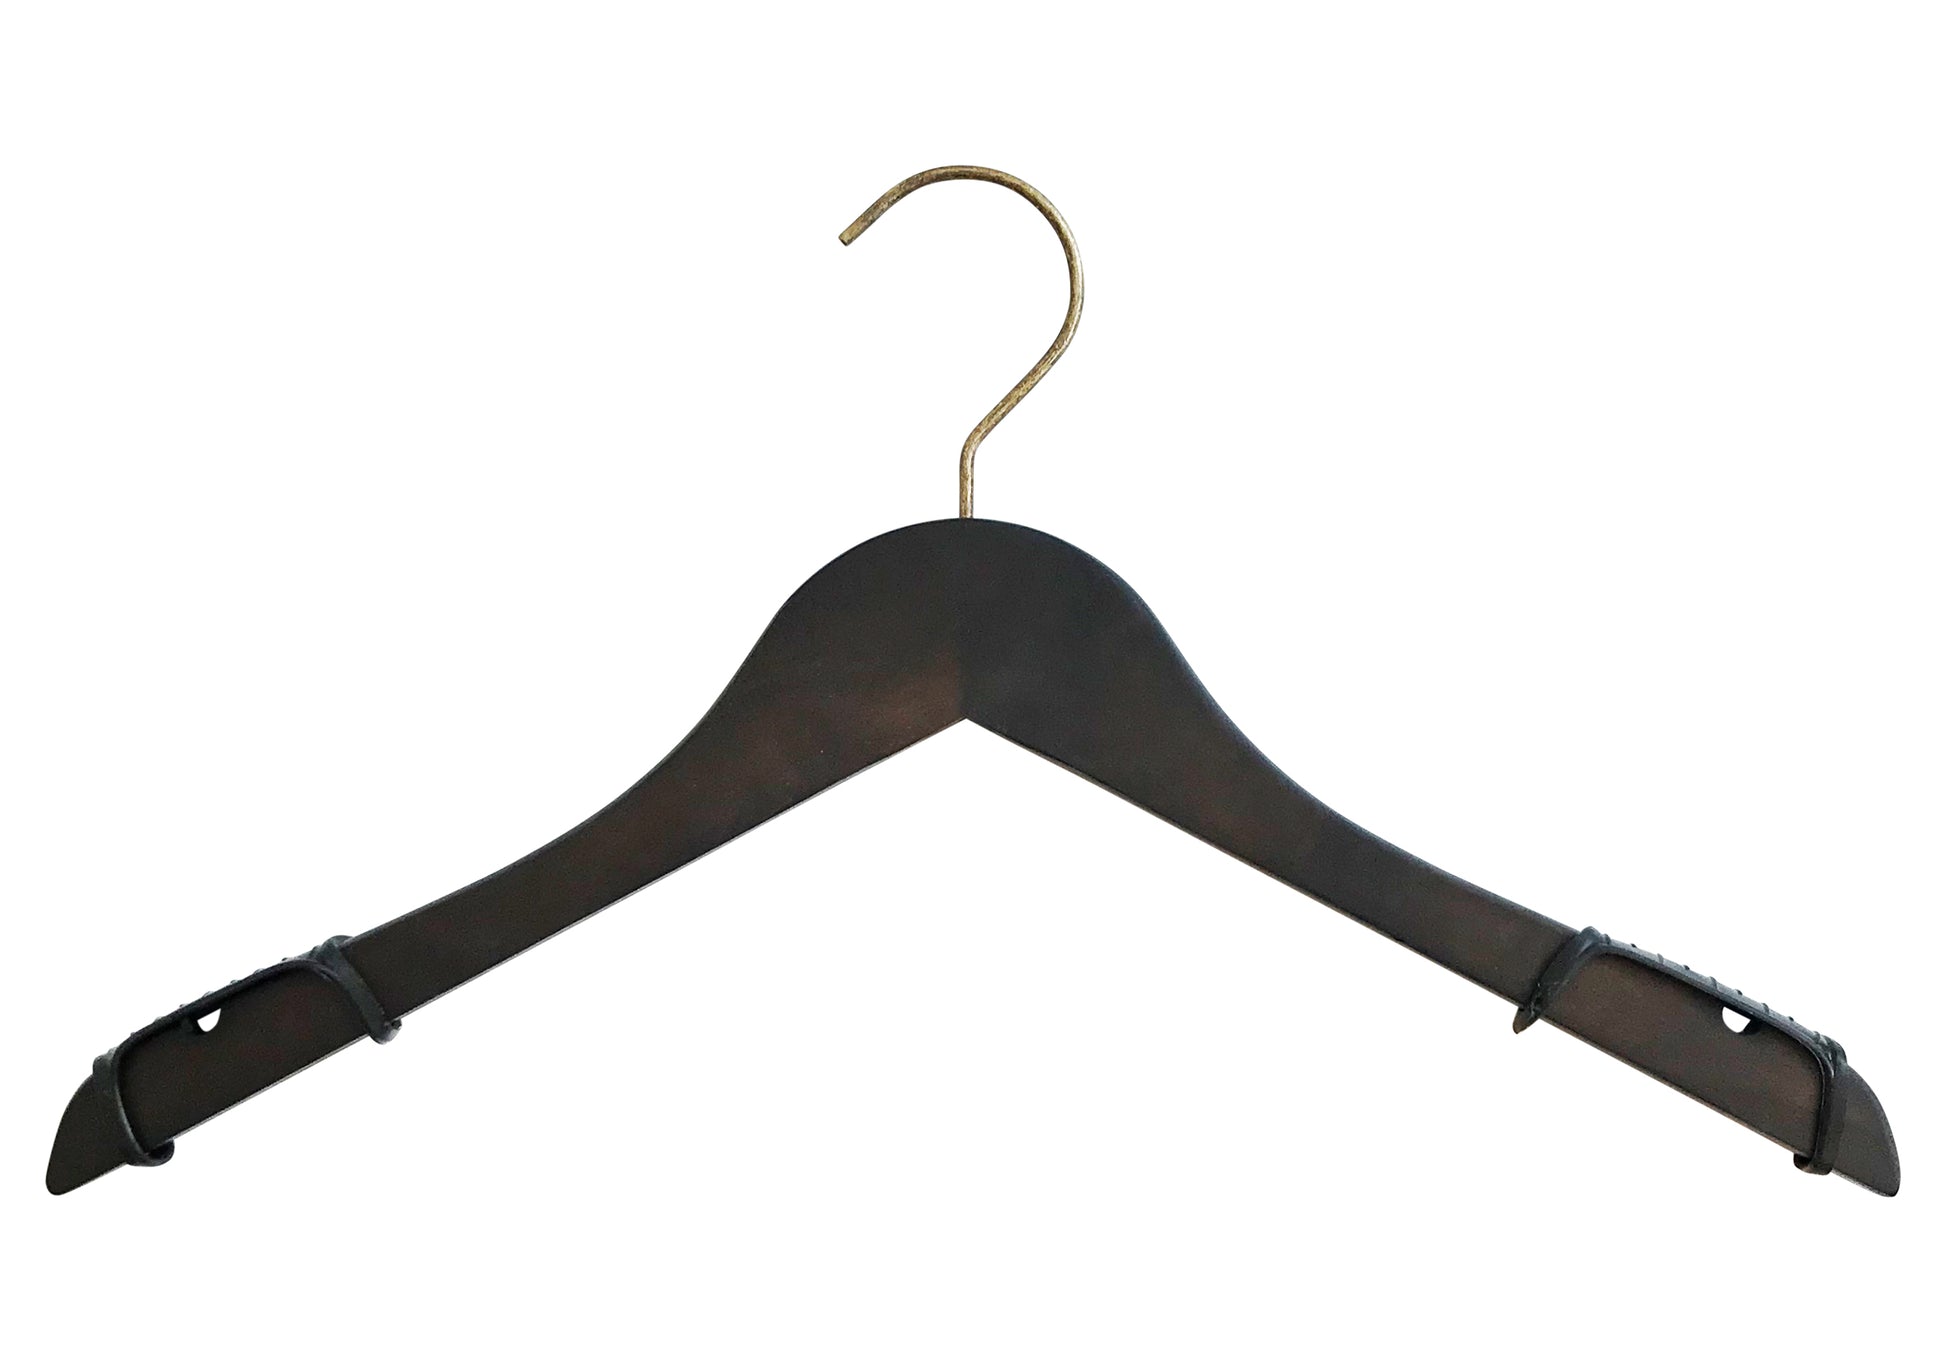 A black wooden clothes hanger with a vintage, wide shoulder design, gold metal hook, and black non-slip grips on each end of the arms. The Wooden Antique finish Top 38cm by Hangers of London is isolated on a white background.